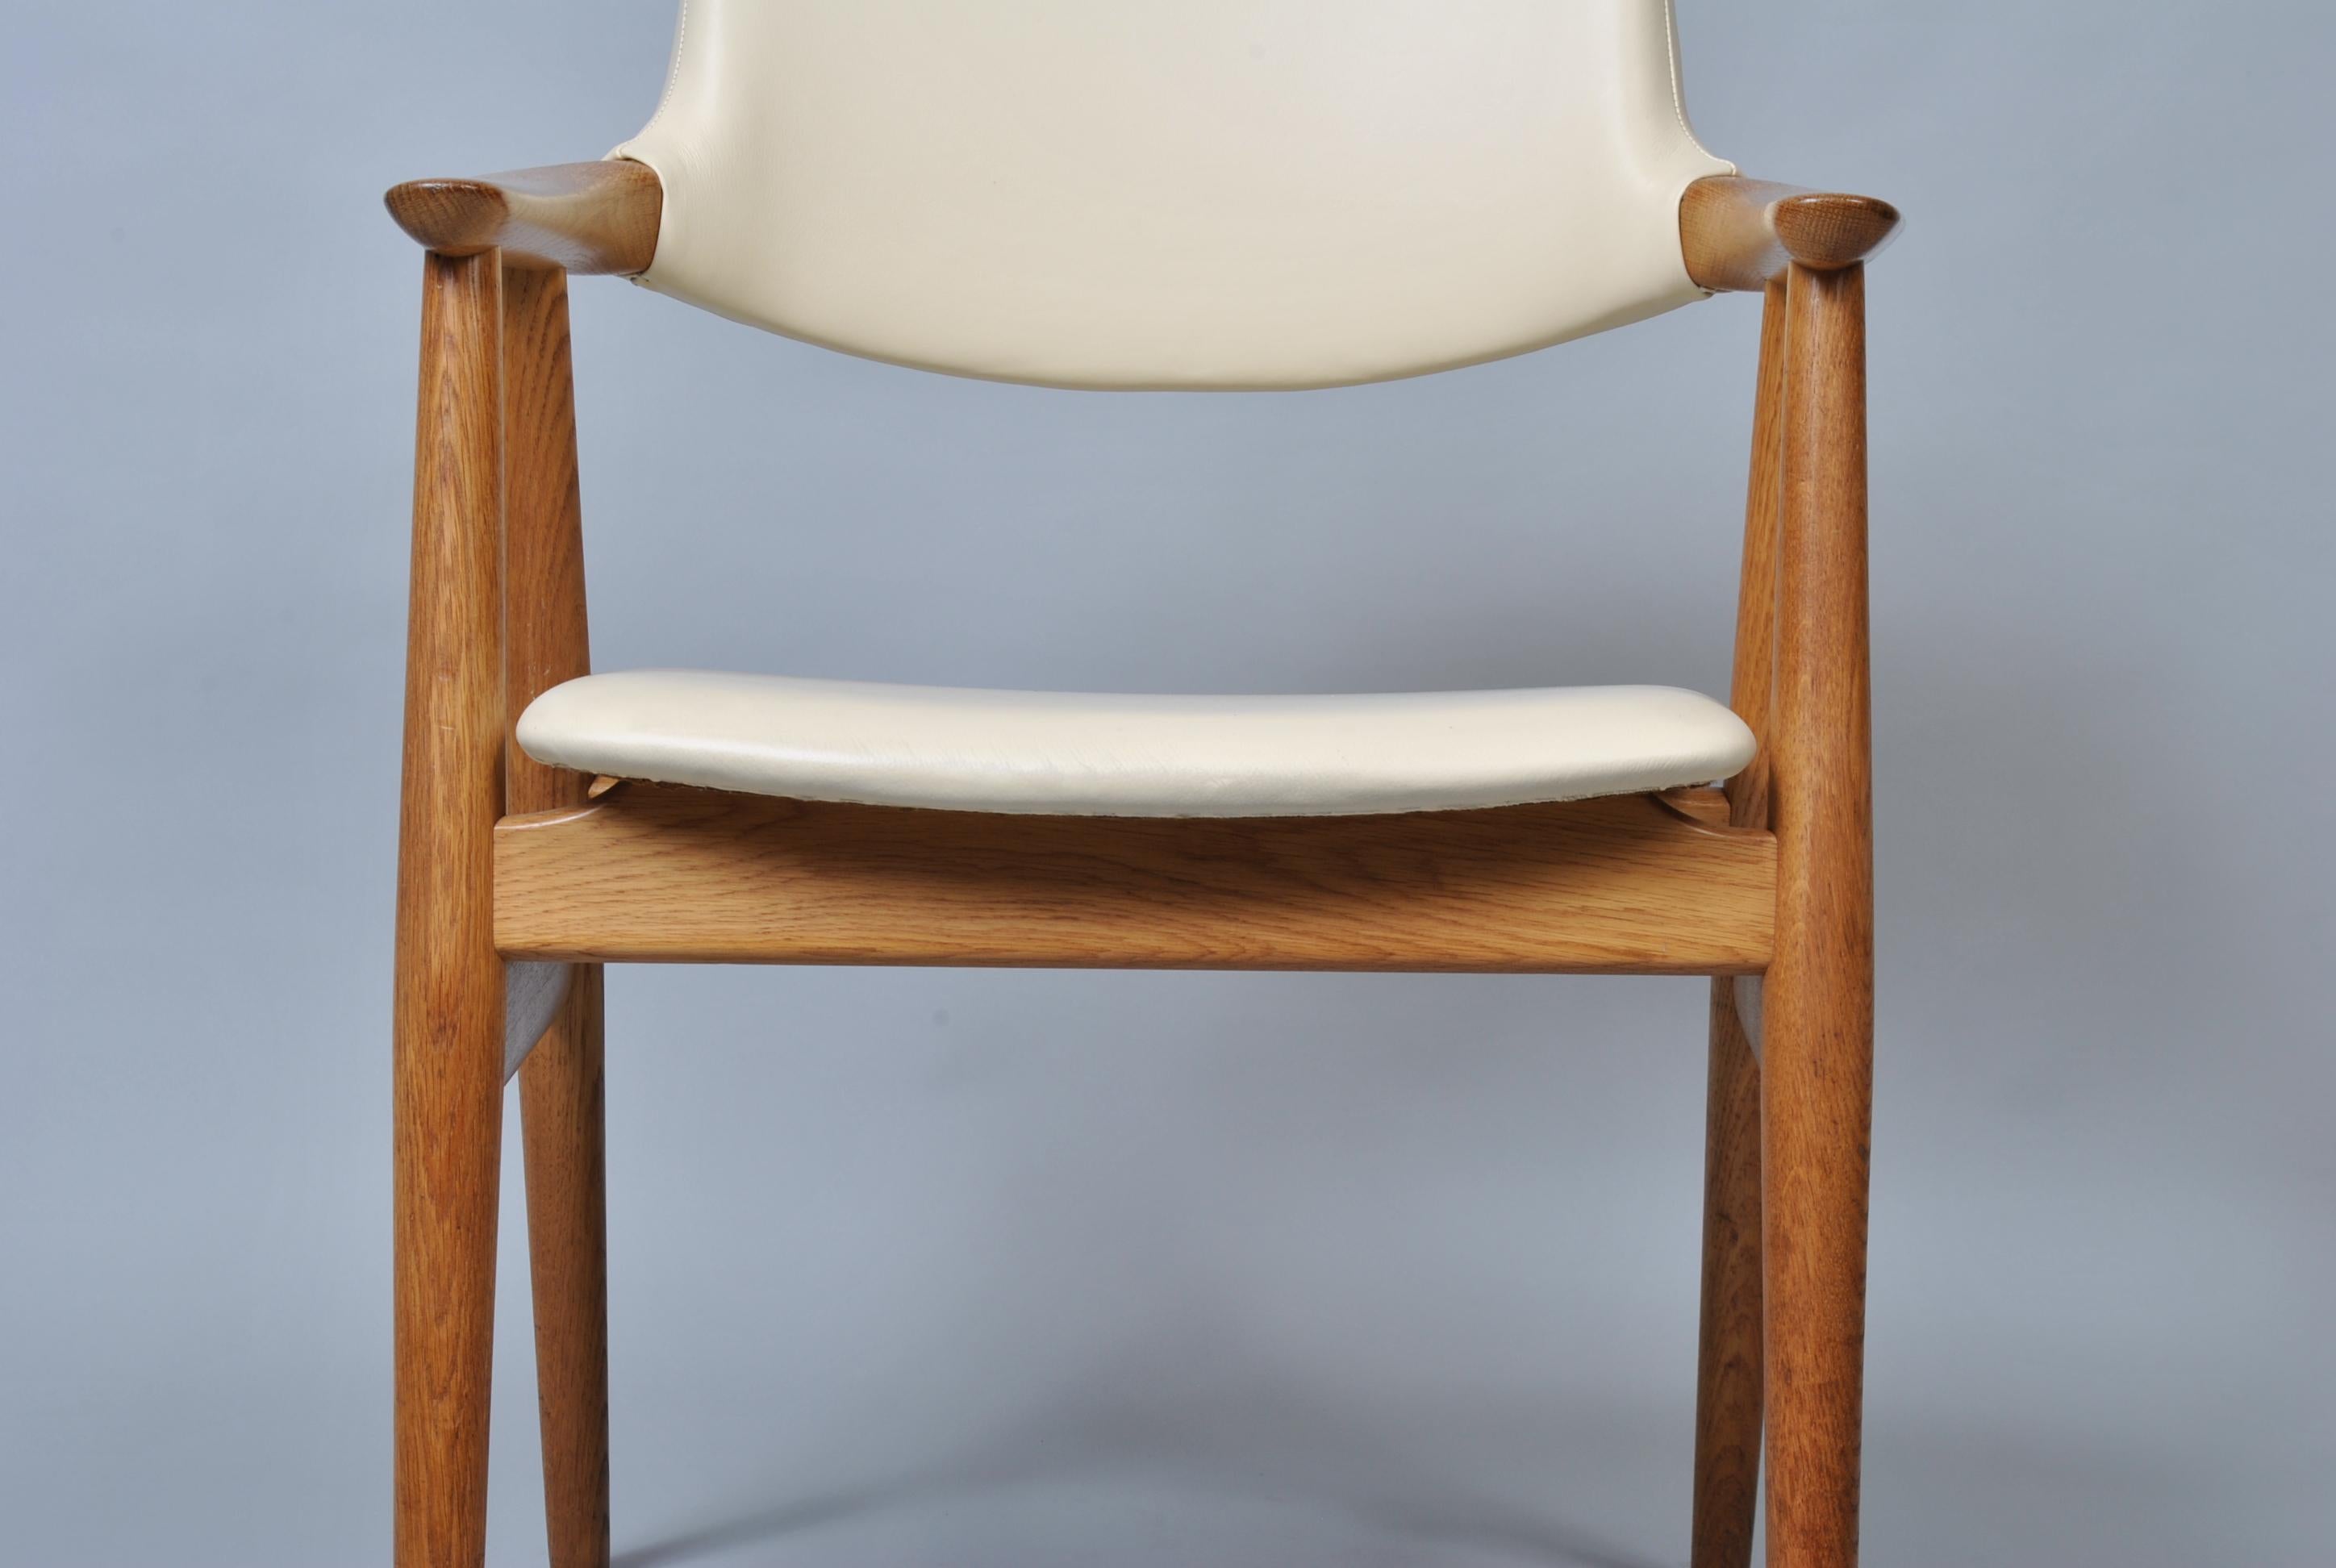 White European oak armchair by Sven Aage Eriksen for Glostrup, Denmark, circa 1960. Refurbished oak frames upholstered in off white leather.
Incredibly comfortable.
 